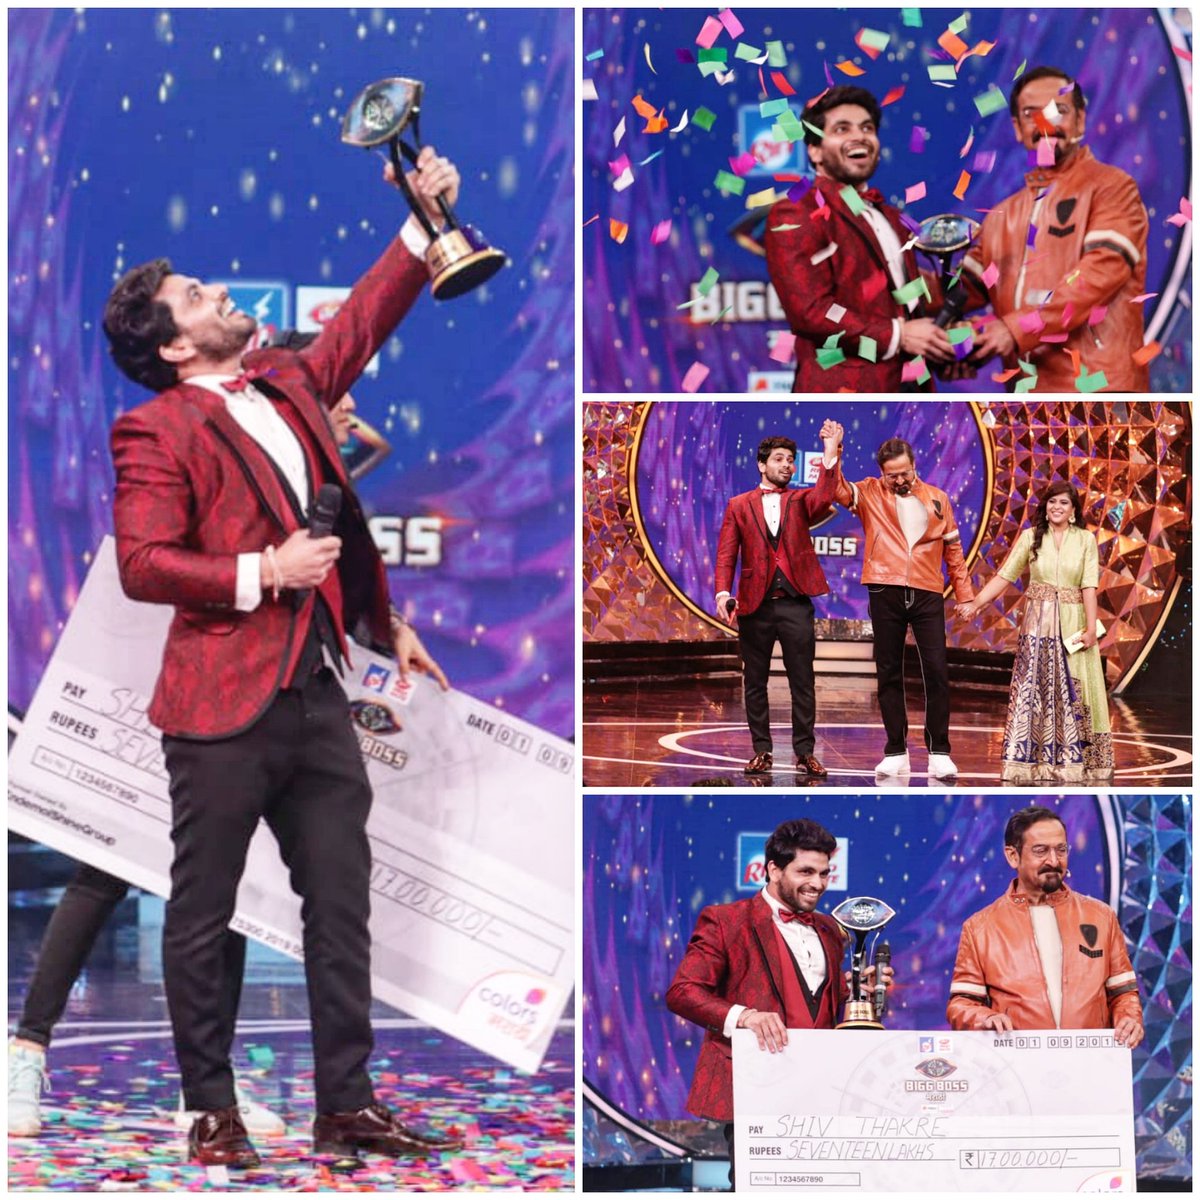 The moment when my dreams came true!
It's not only my victory but your victory too✌
Thank you all for your support and best wishes!
.
.
.
#BiggBossMarathi2Winner #AaplaManus #MarathiBoy #BiggBossMarathi2🏆